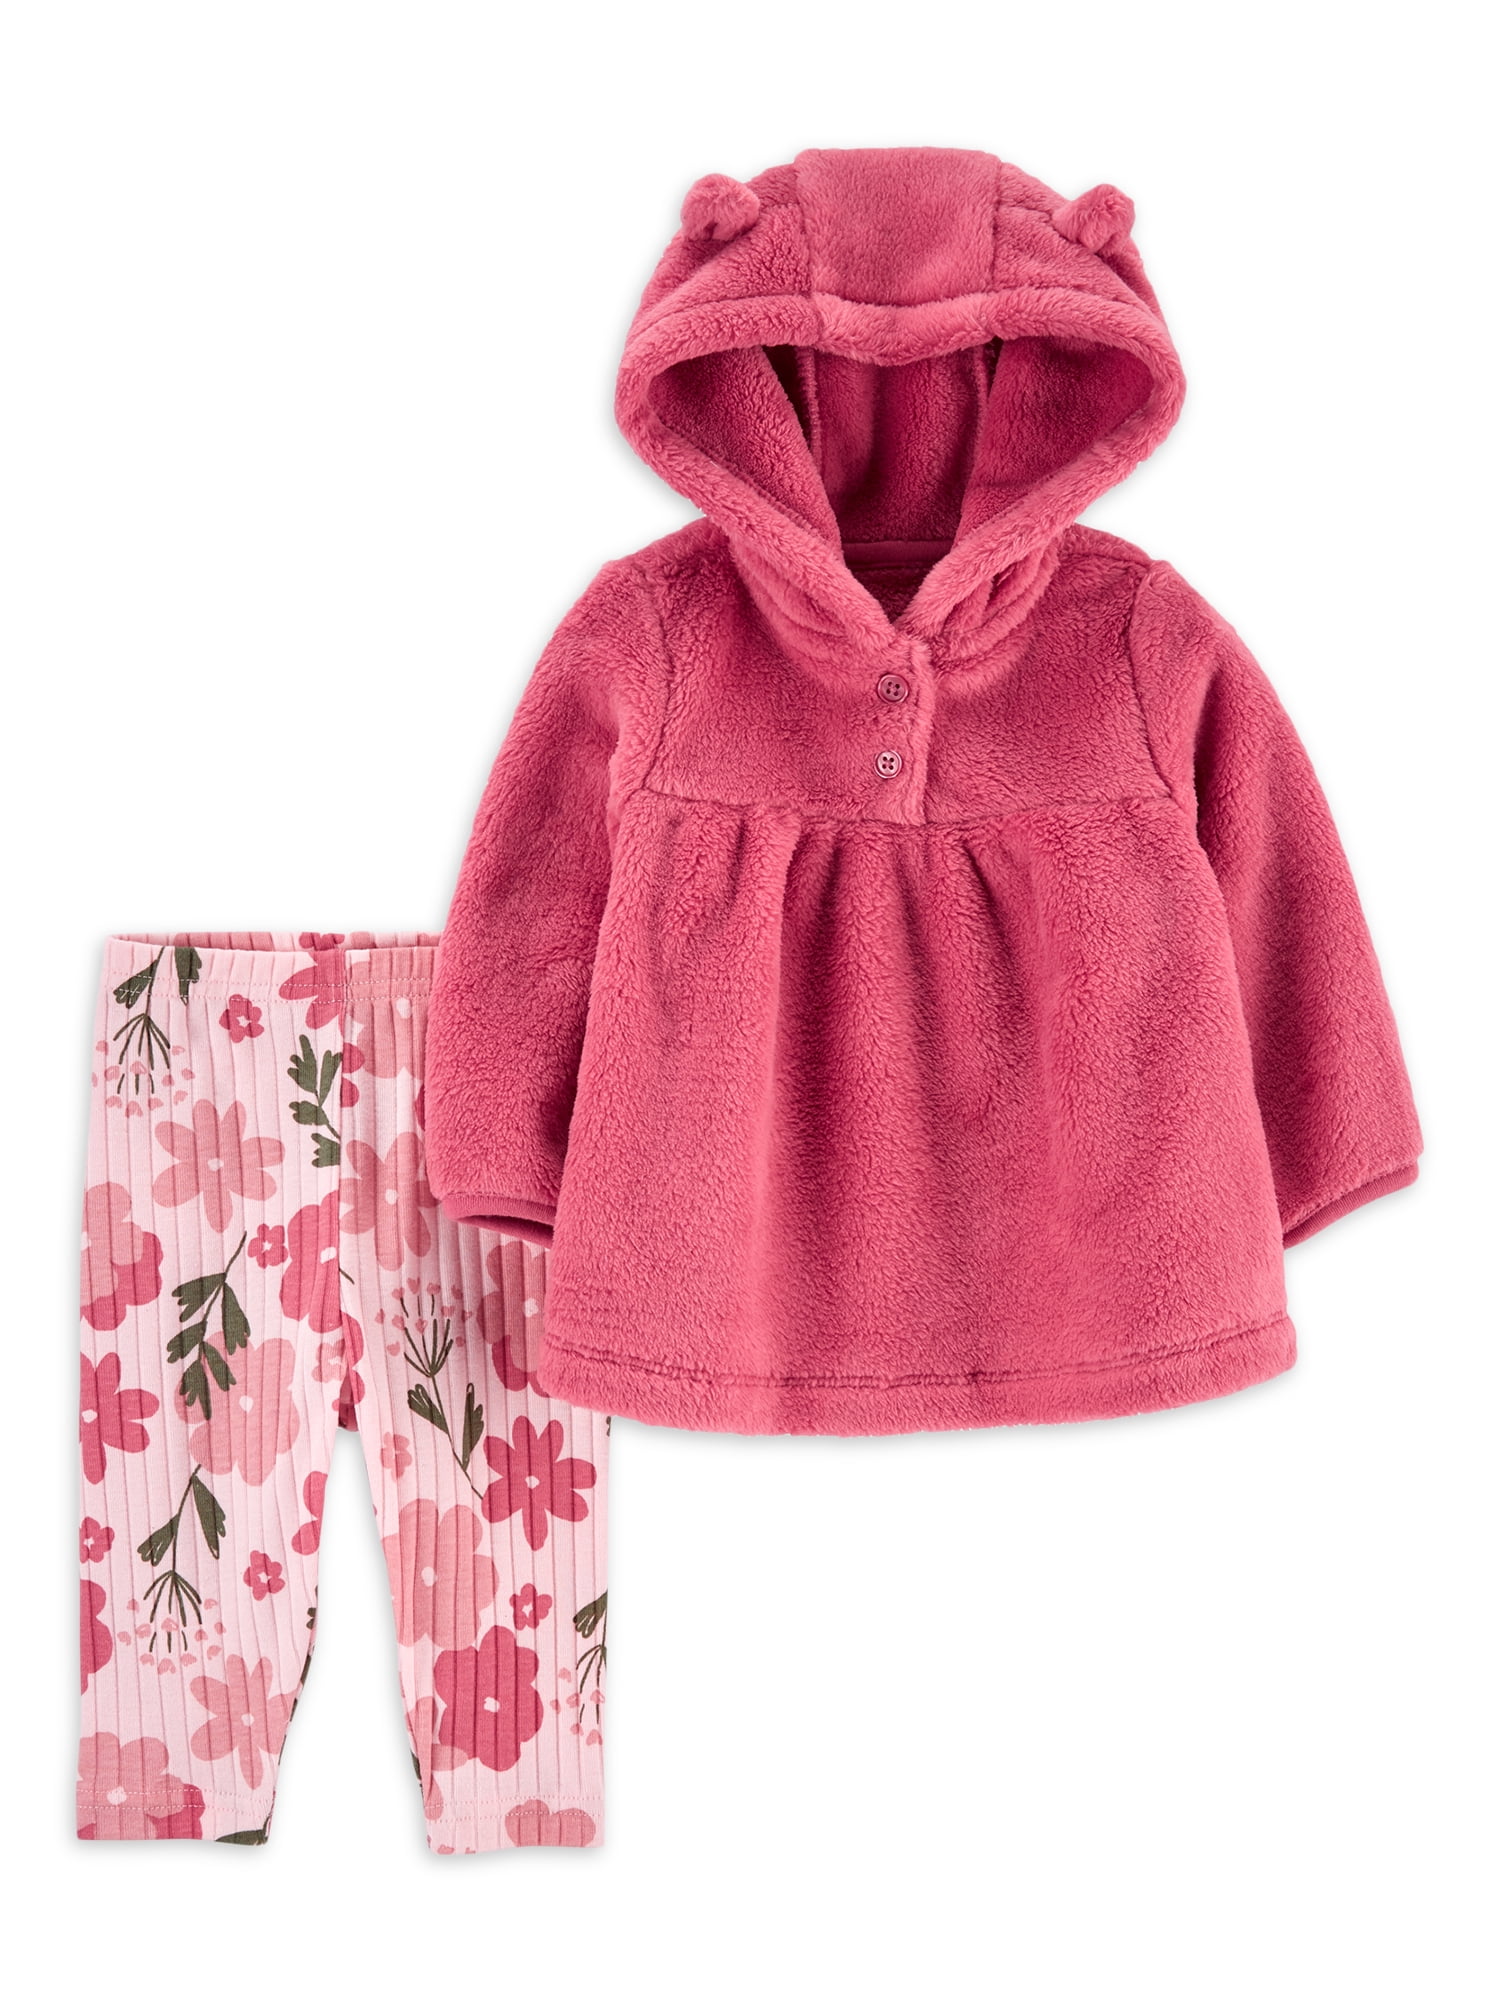 Carter's Child of Mine Baby Girl Hooded Outfit Set, 2-Piece, Sizes 0-24M